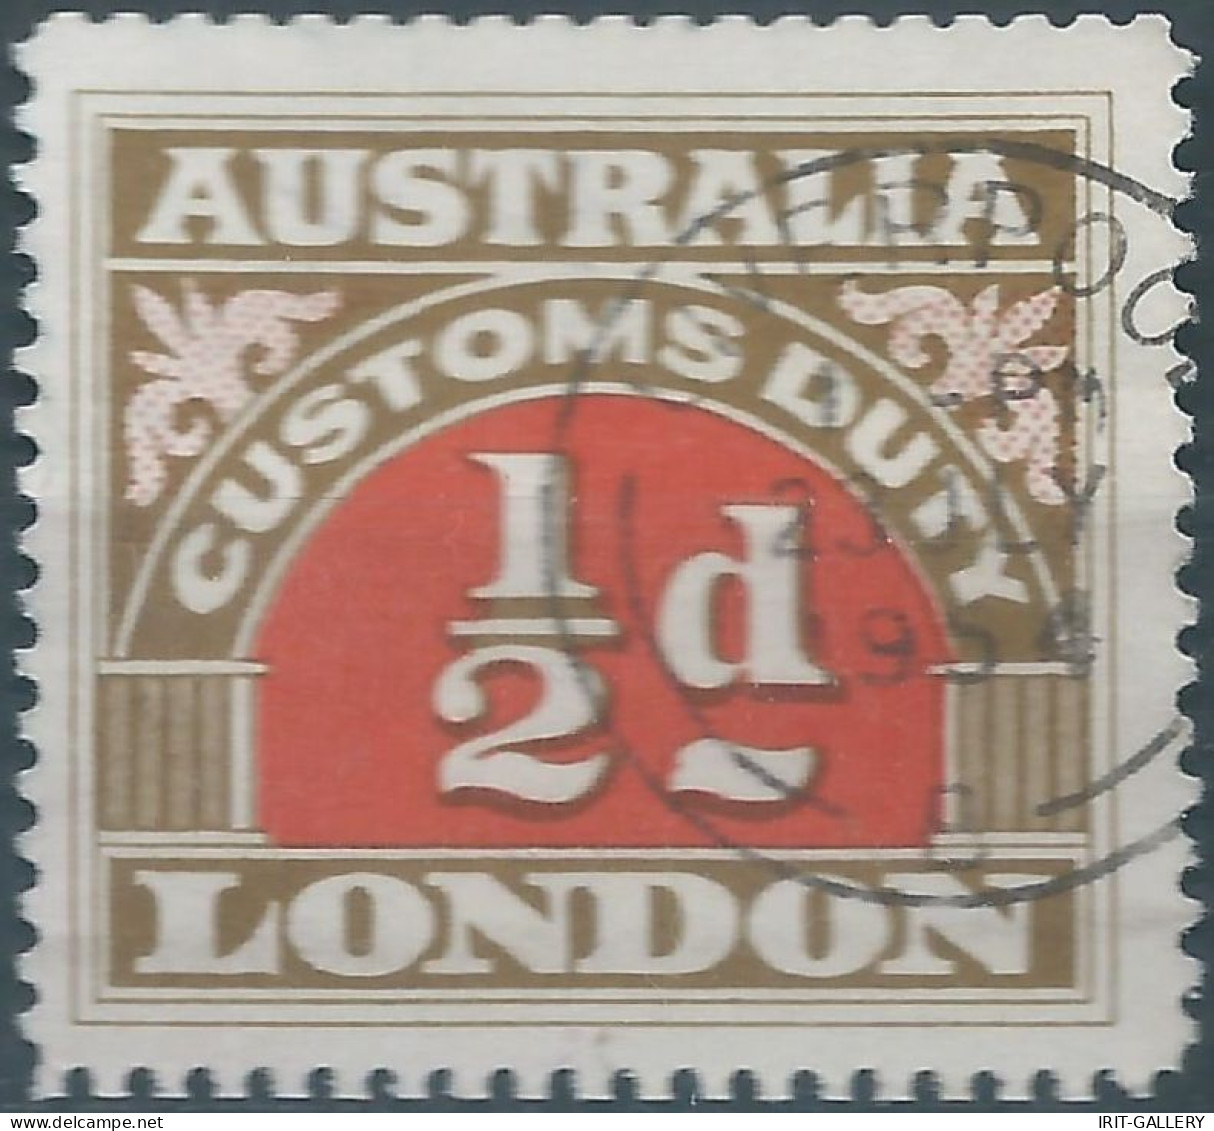 AUSTRALIA,1954 Customs Duty - Revenue Stamp Tax Fiscal 1/2d - LONDON  ,Obliterated - Fiscales